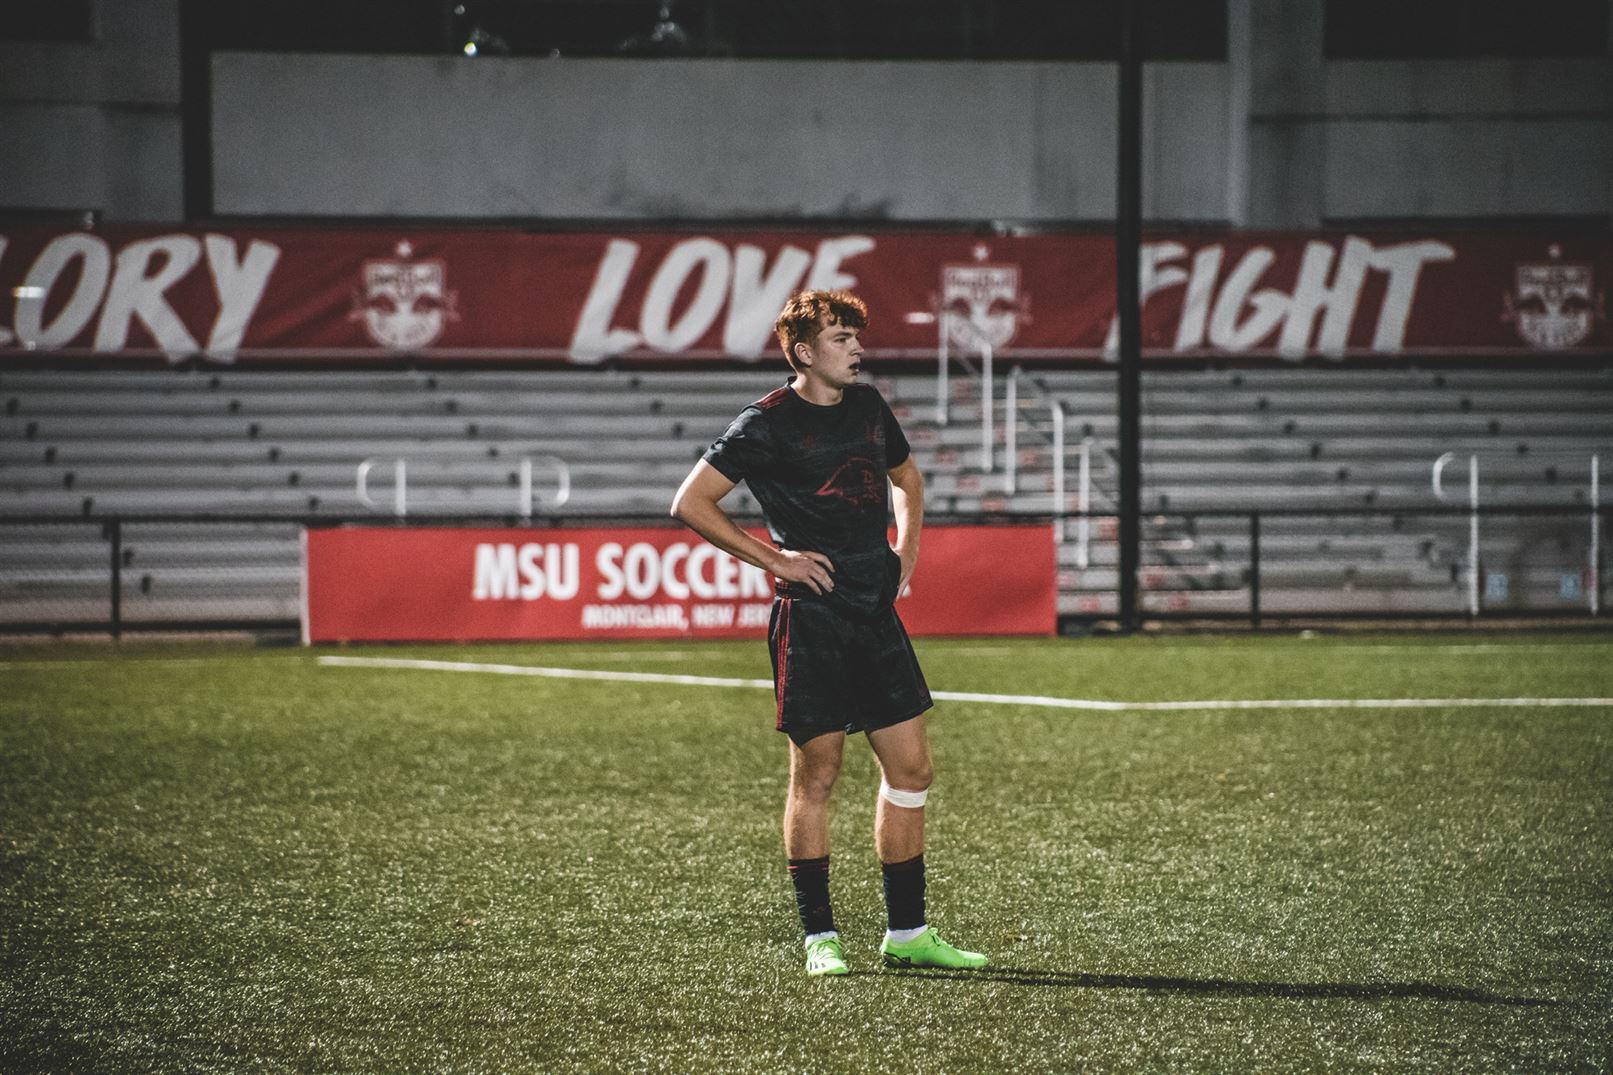 Ian Chesney gets into position on the pitch and waits for an opportunity. Dan Driesbach | The Montclarion